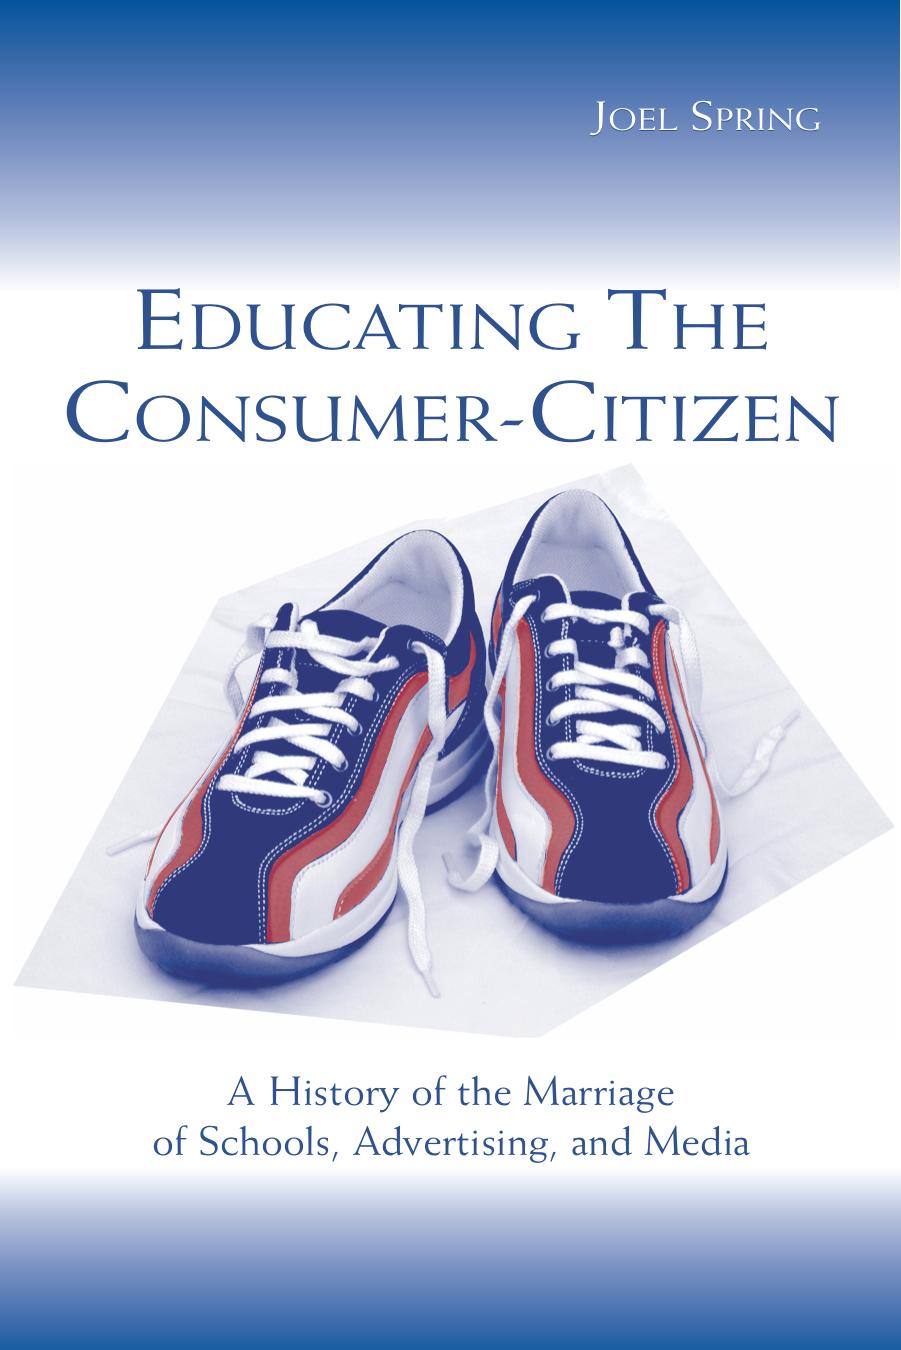 A History of the Marriage of Schools, Advertising, and Media -Routledge (2003)